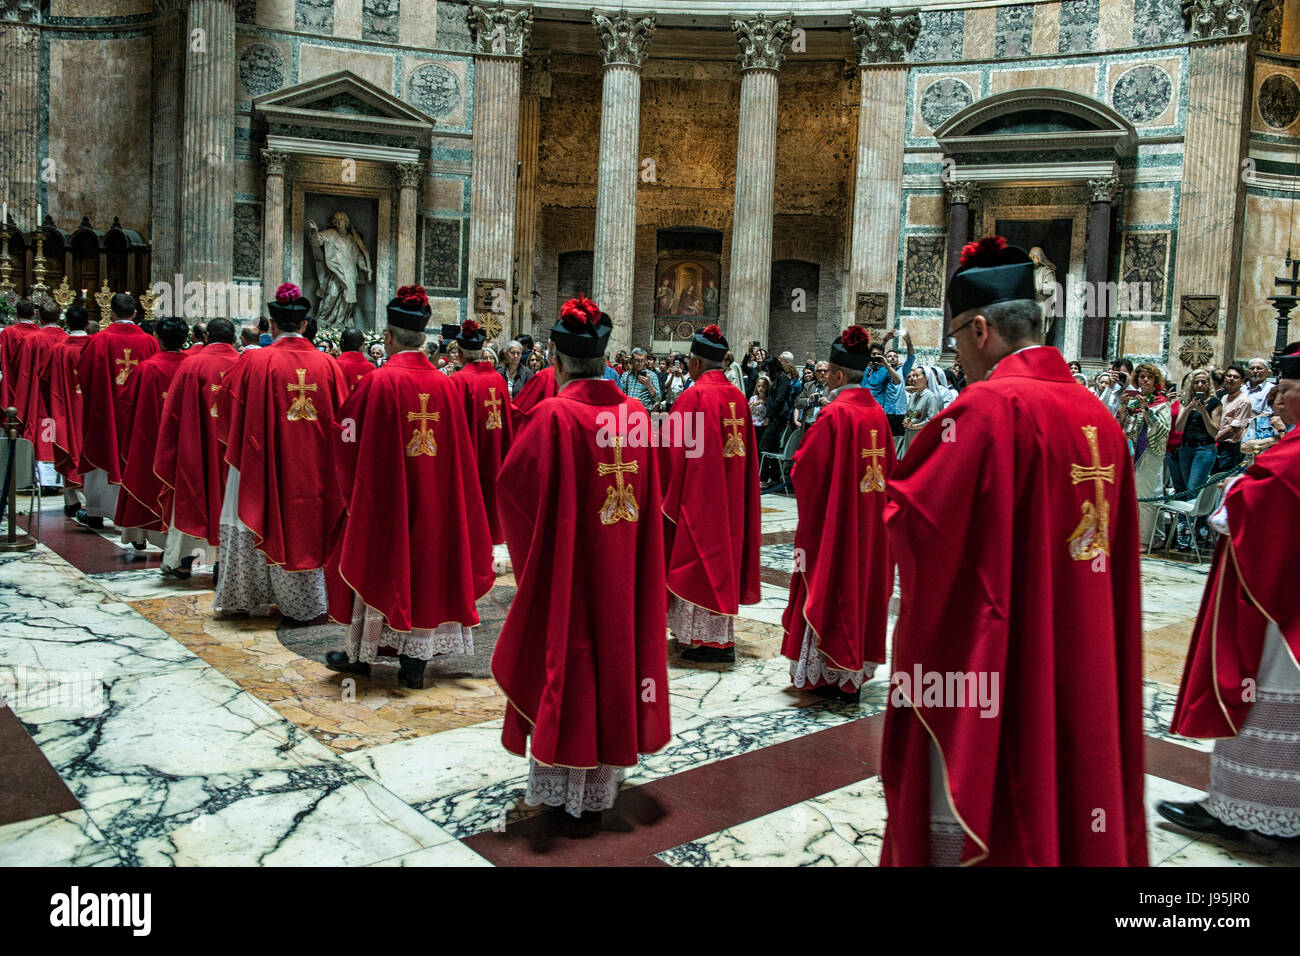 Rome, Italy. 04th June, 2017. The priests enter in the Pantheon of Rome, Italy, to celebrate the Pentecost missa, that will end with the throw of the red roses Credit: Realy Easy Star/Alamy Live News Stock Photo